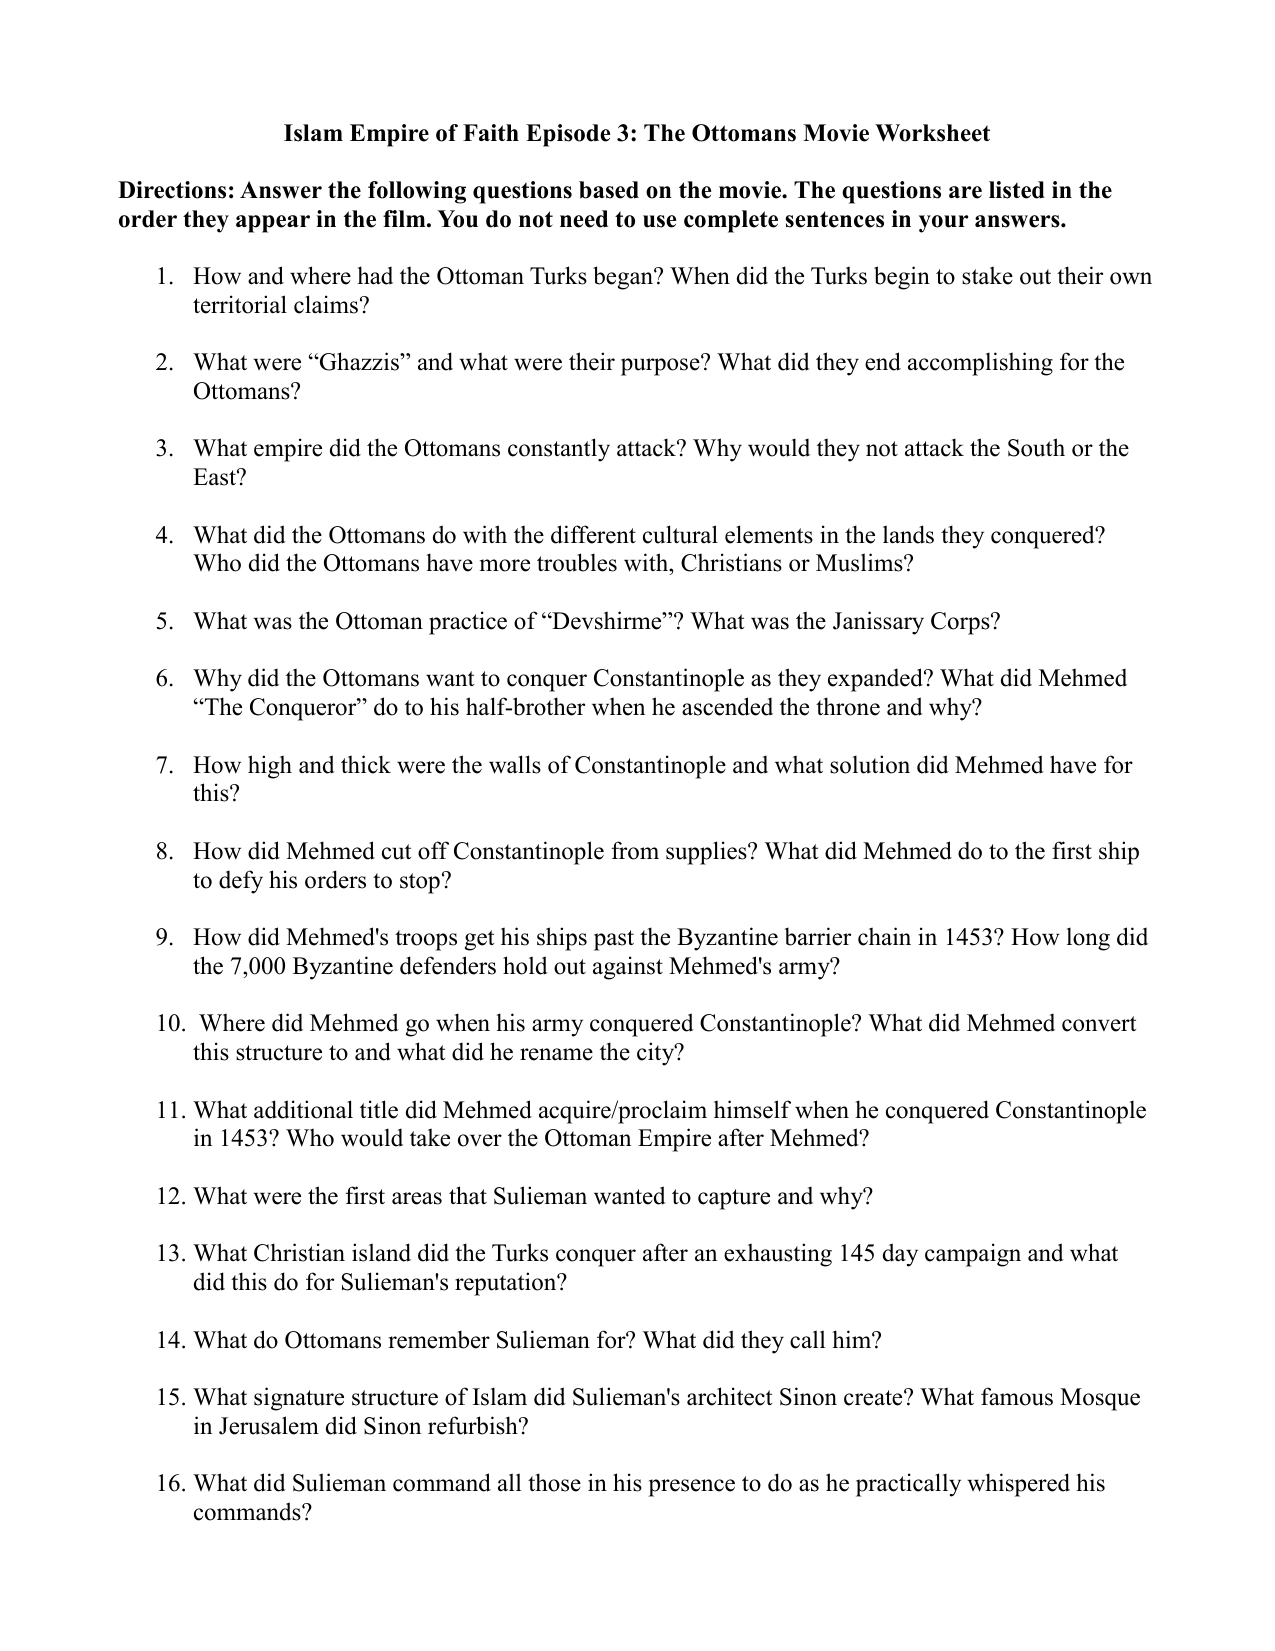 Islam Empire Of Faith Episode 3 The Ottomans Movie Worksheet With Regard To Islam Empire Of Faith Part 1 Worksheet Answers